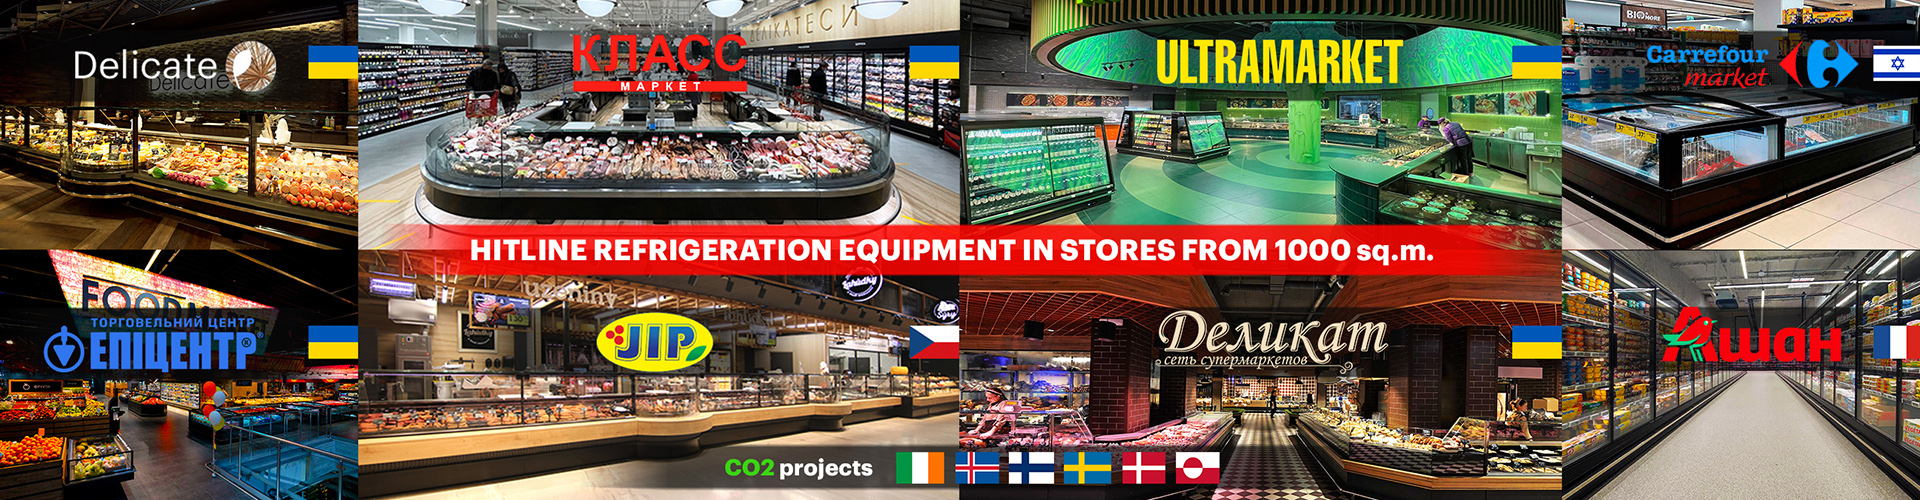 Hitline refrigeration equipment in stores from 1000 sq.m., as well as CO2 projects